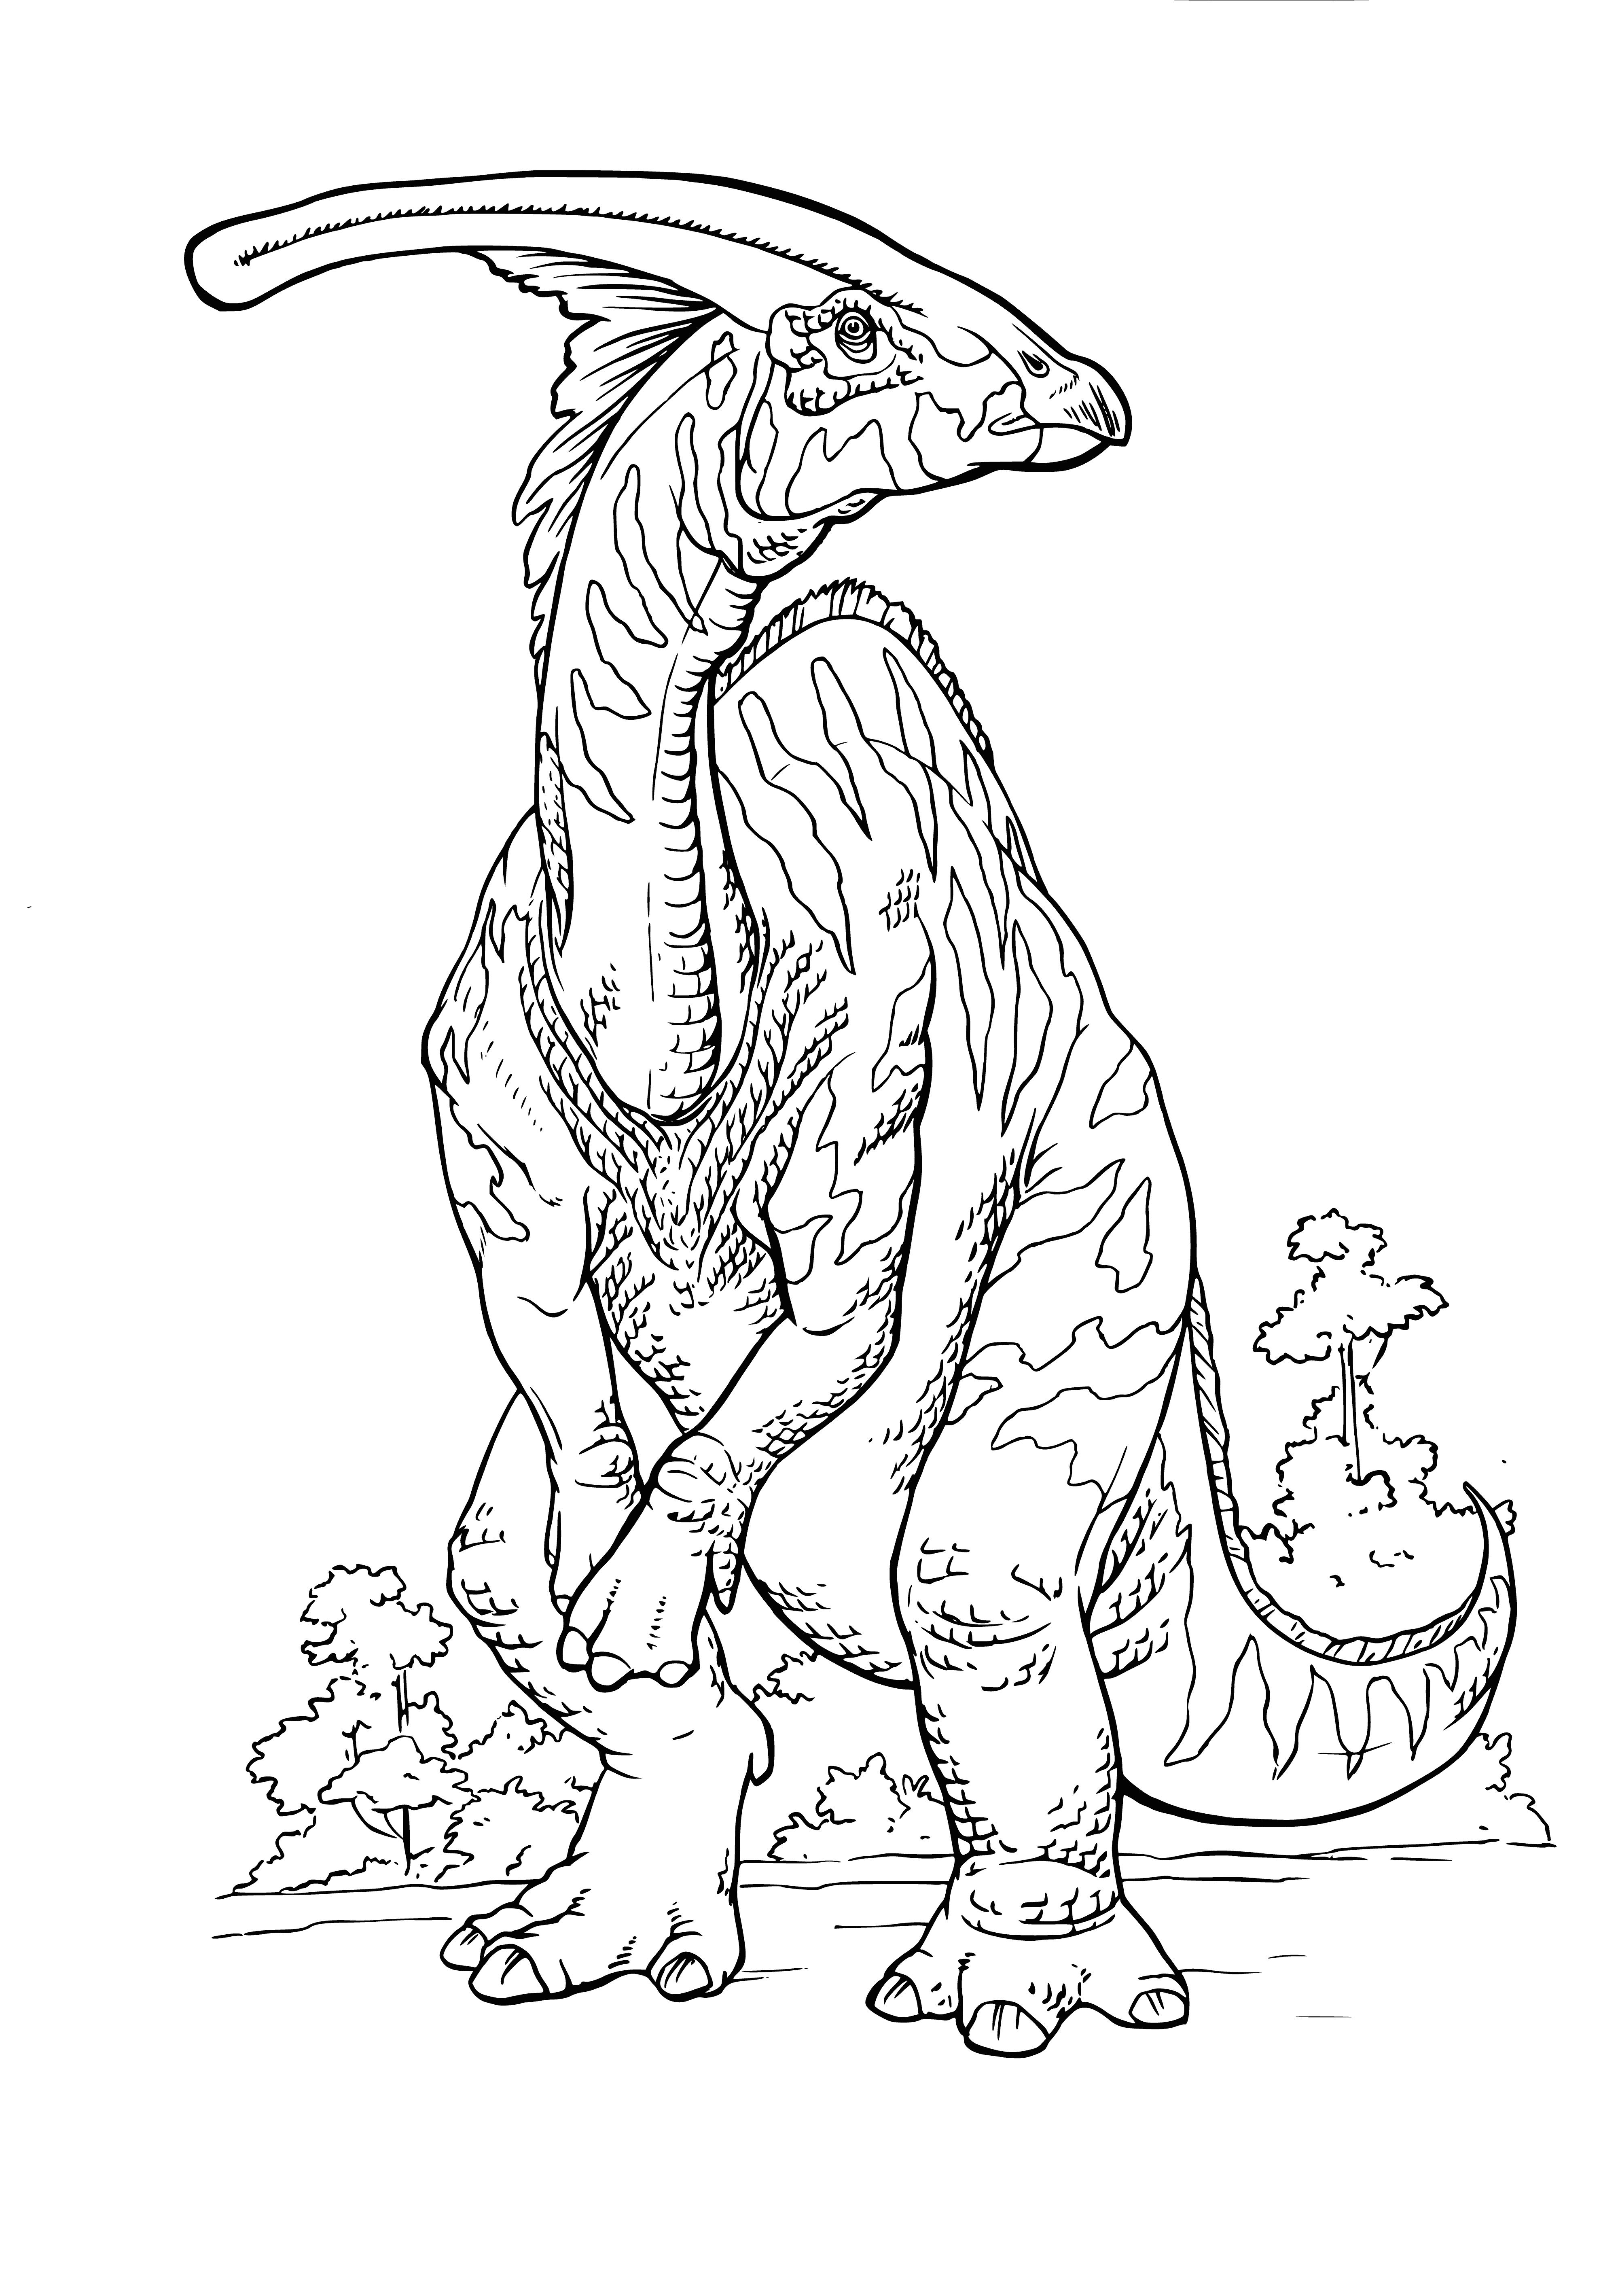 coloring page: Large 4-legged creature with scaly green skin and white belly. Long neck and tail with spikes. Small head.